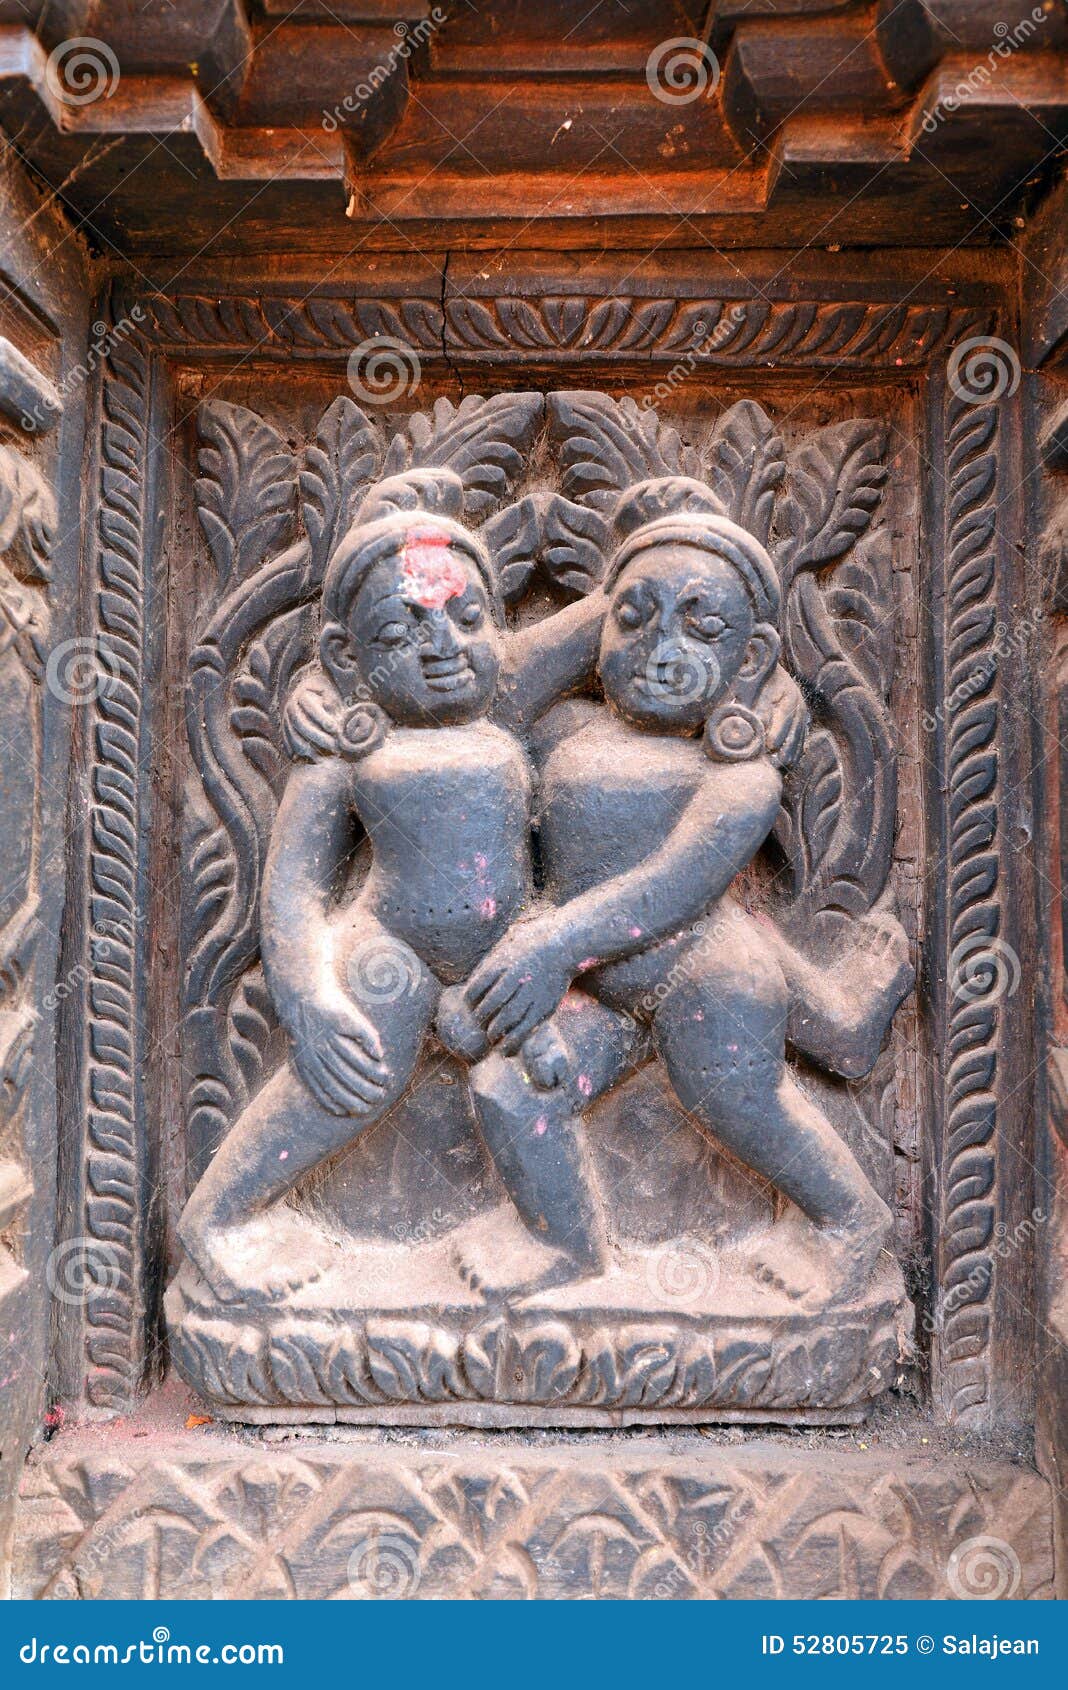 Erotic Wooden Carving Motif on a Hindu Temple in Nepal Stock Image